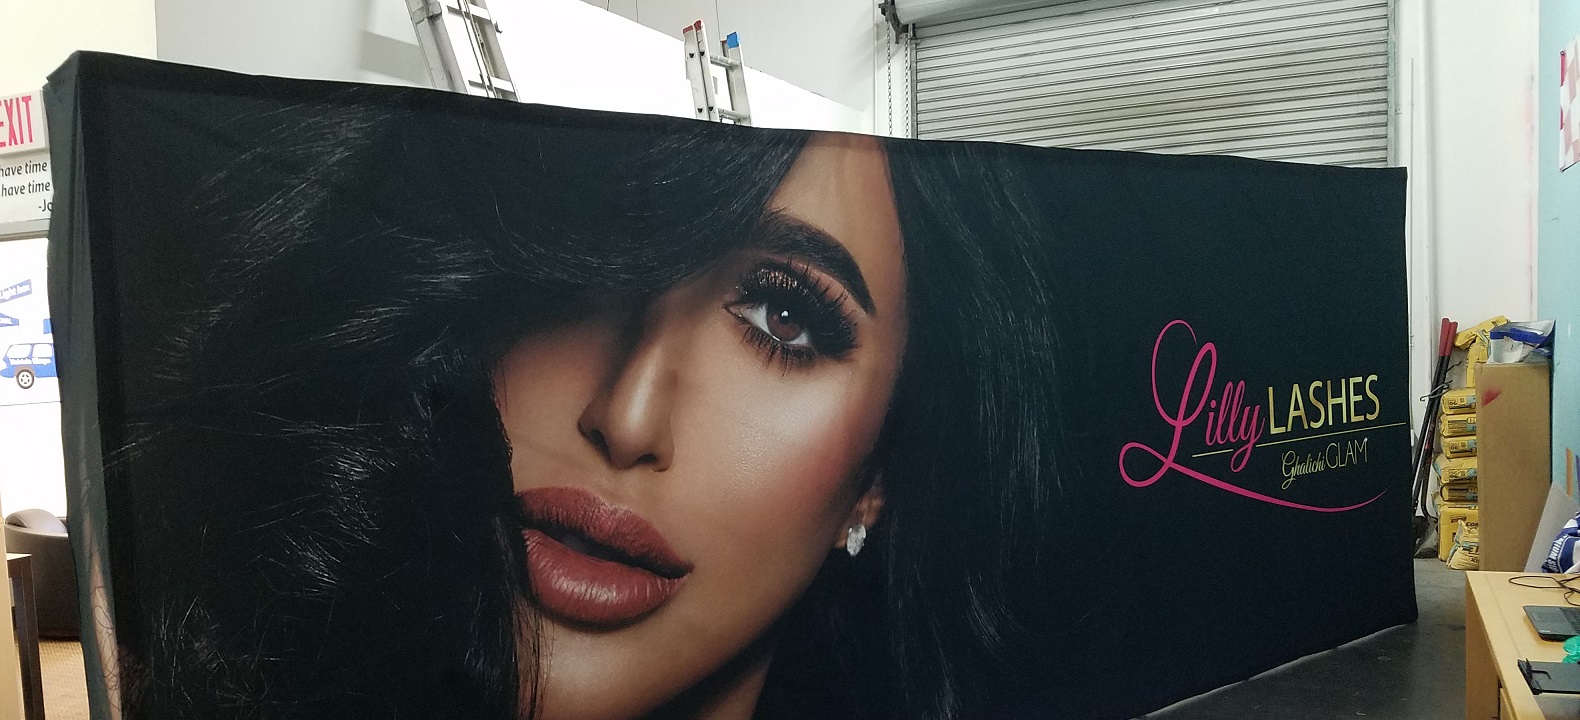 You are currently viewing 20 Foot Wide Collapsible Trade Show Signage for Lilly Lashes